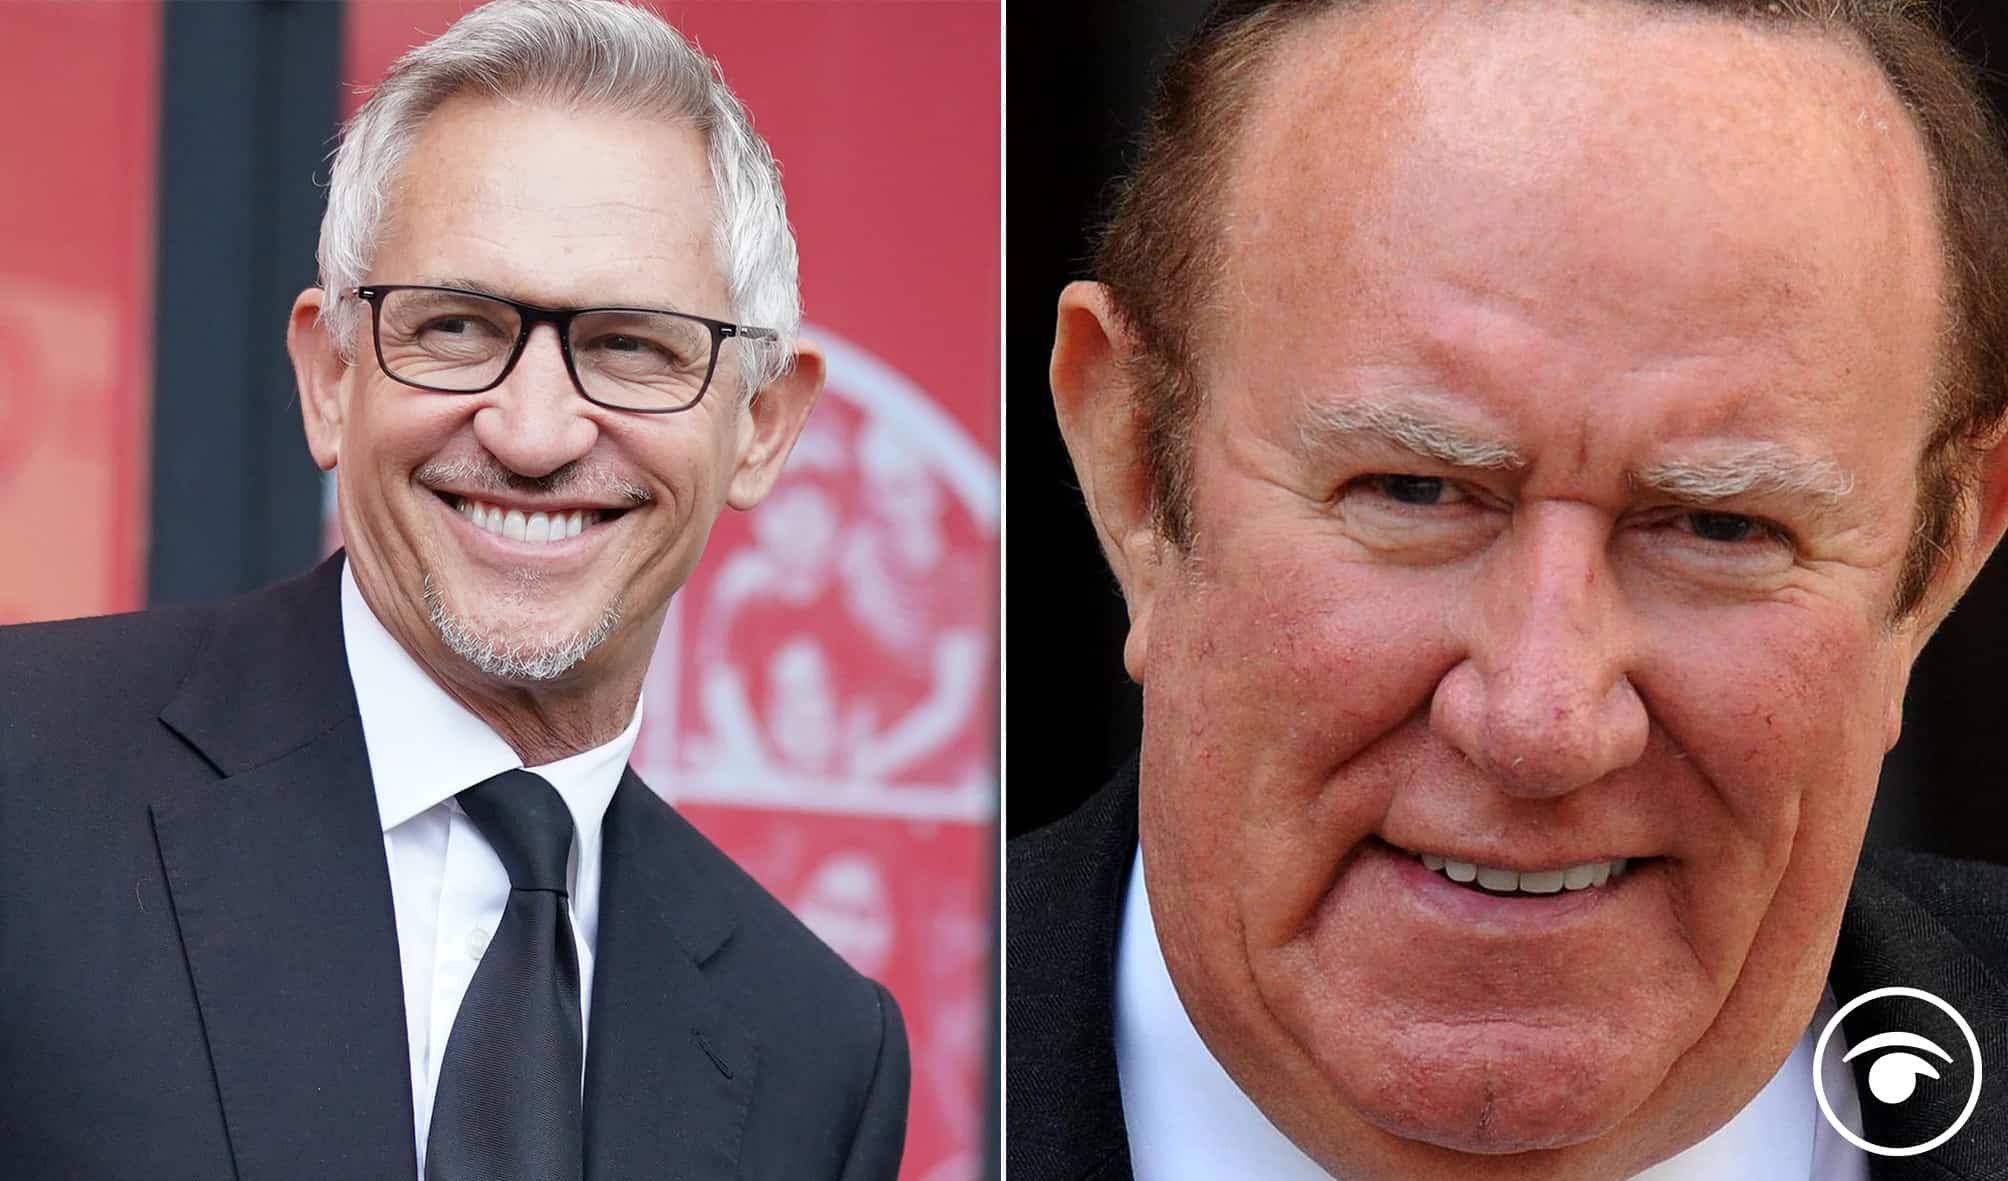 Gary Lineker had best response after Andrew Neil tried to troll him on Twitter